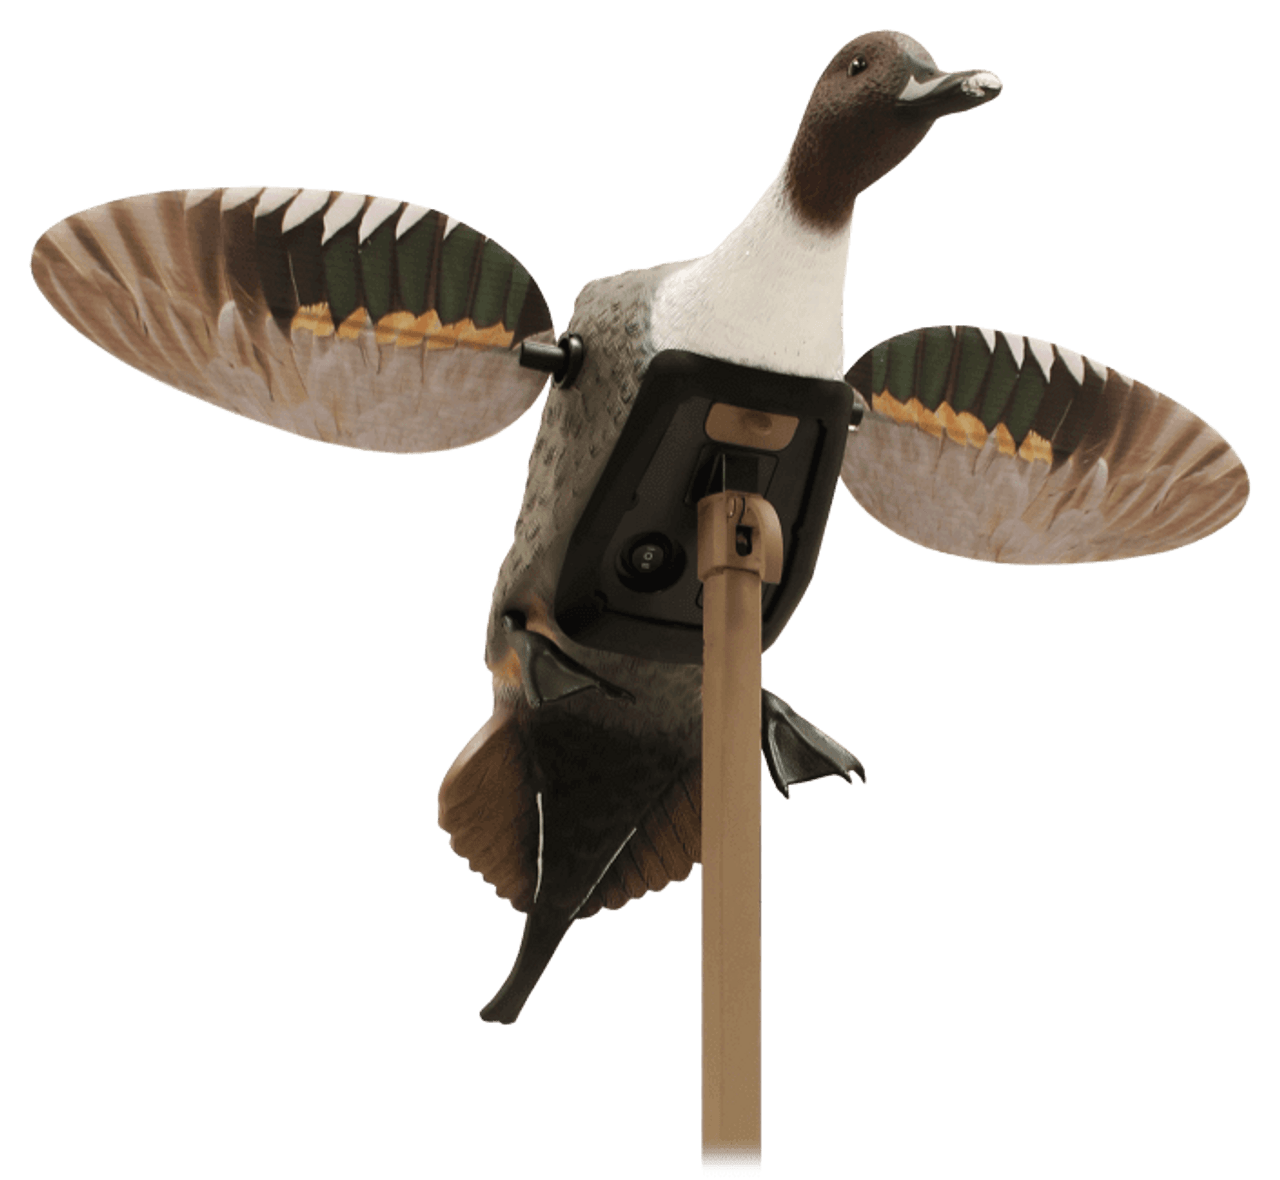 MOJO Outdoors Elite Series Pintail Motorized Duck Decoy. CHICKEN PIECES.